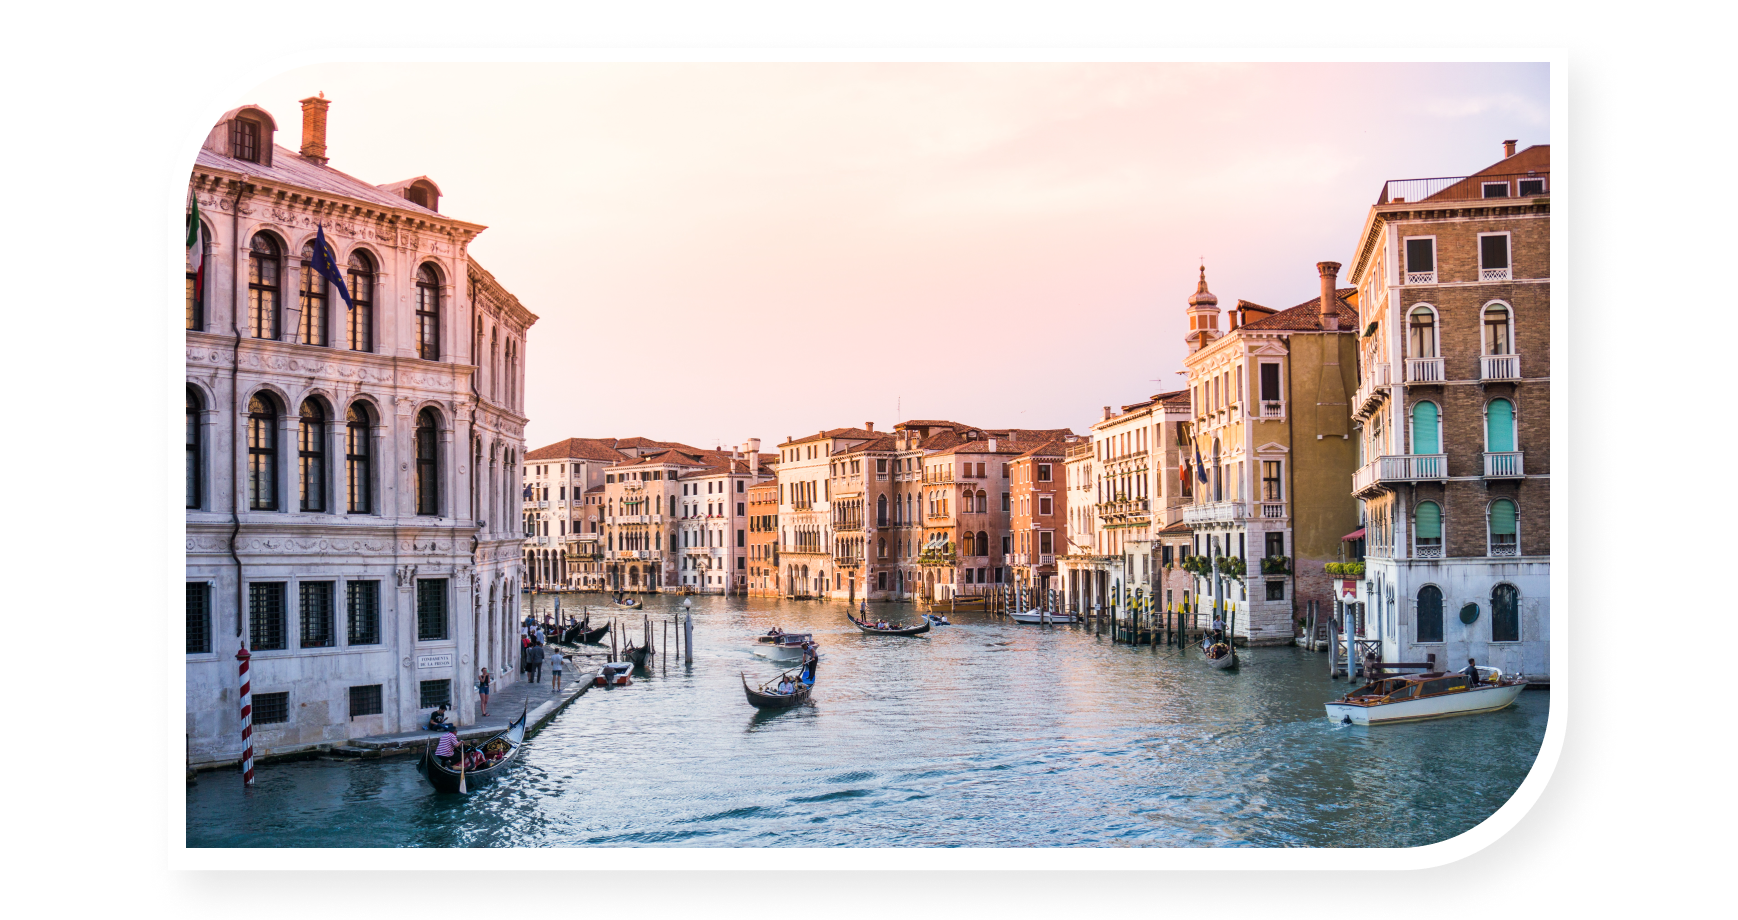 Venice canal at sunset